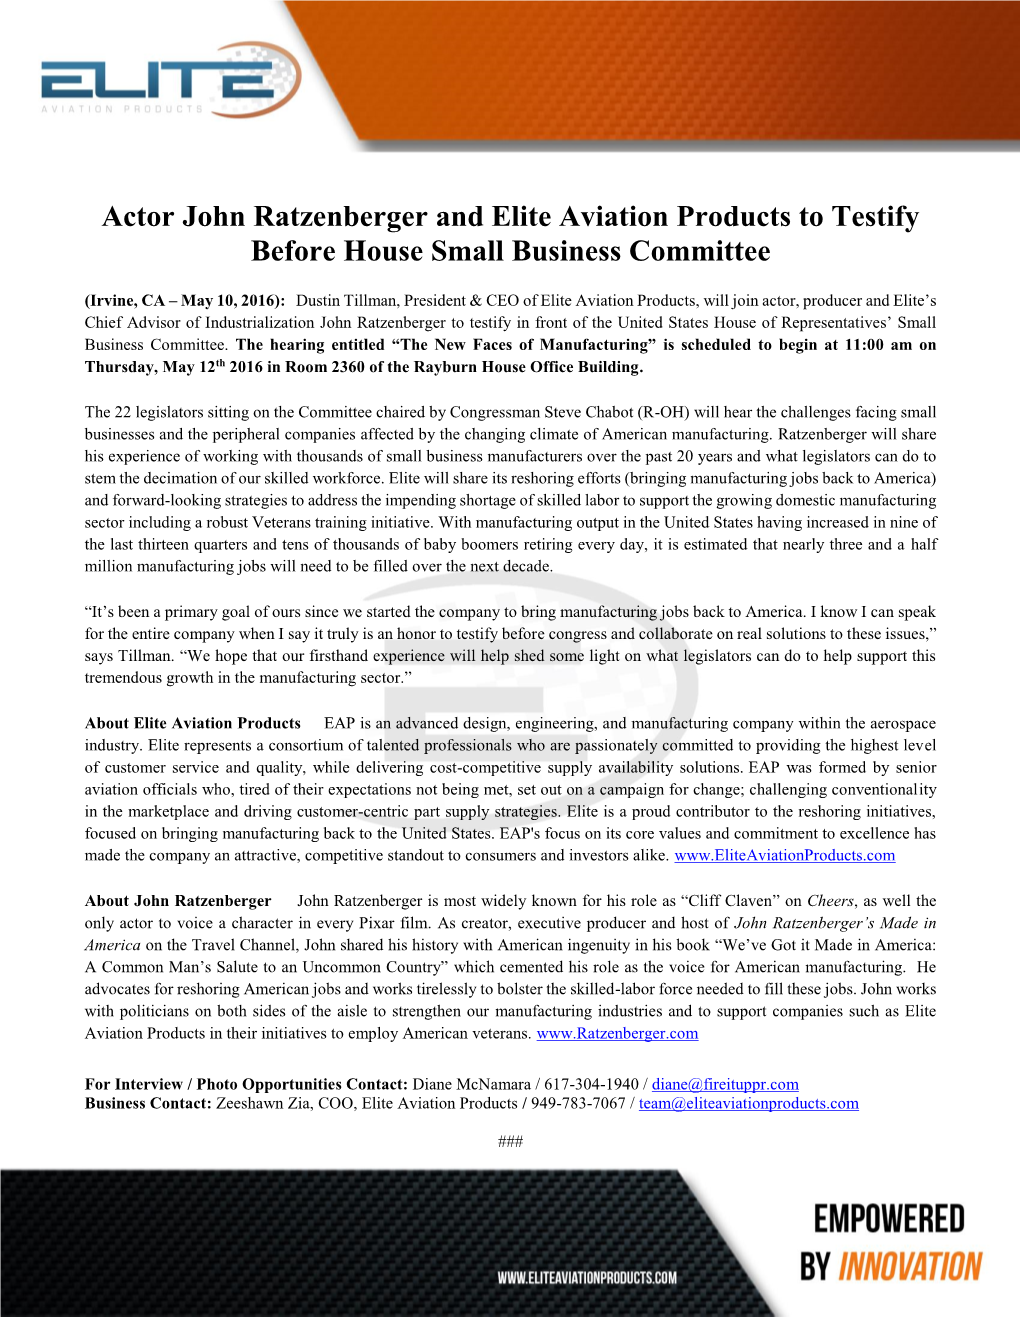 Actor John Ratzenberger and Elite Aviation Products to Testify Before House Small Business Committee